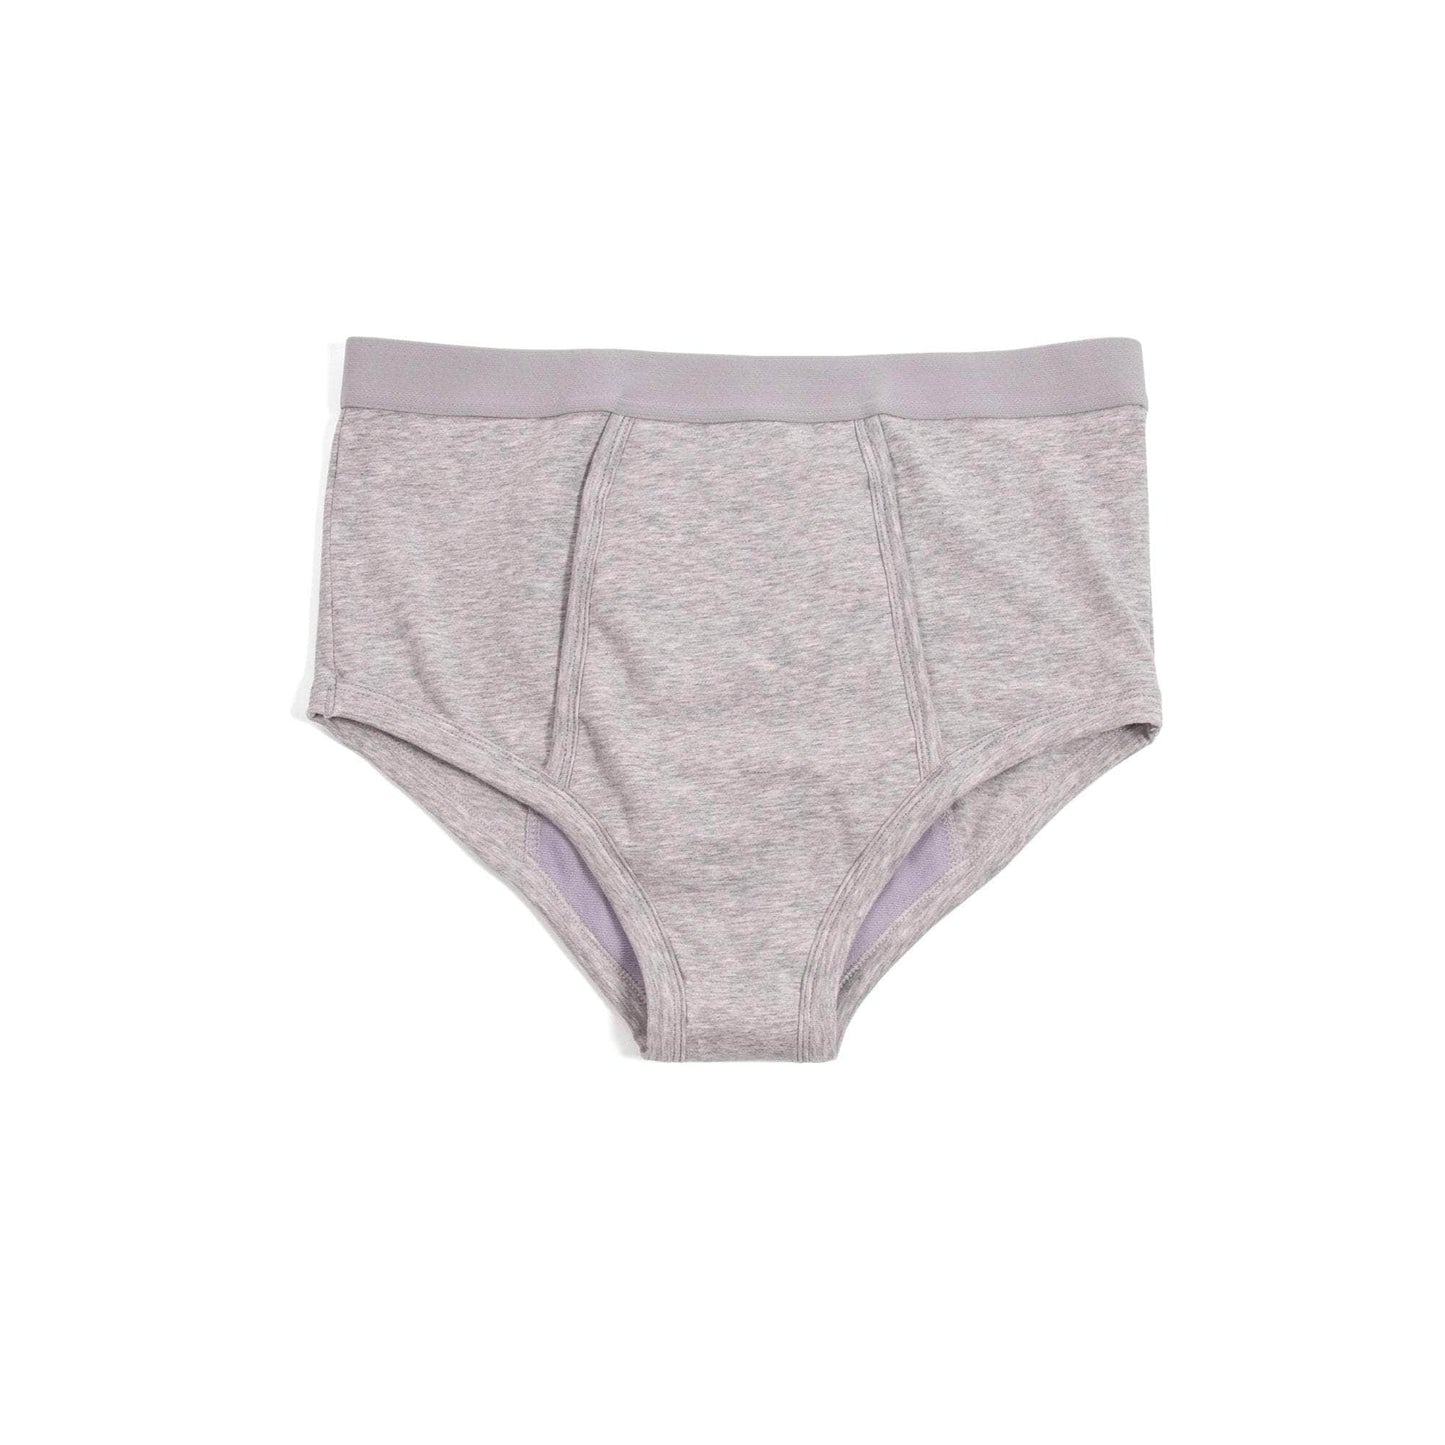 Men's Oscar Incontinence Underwear - Caring Clothing